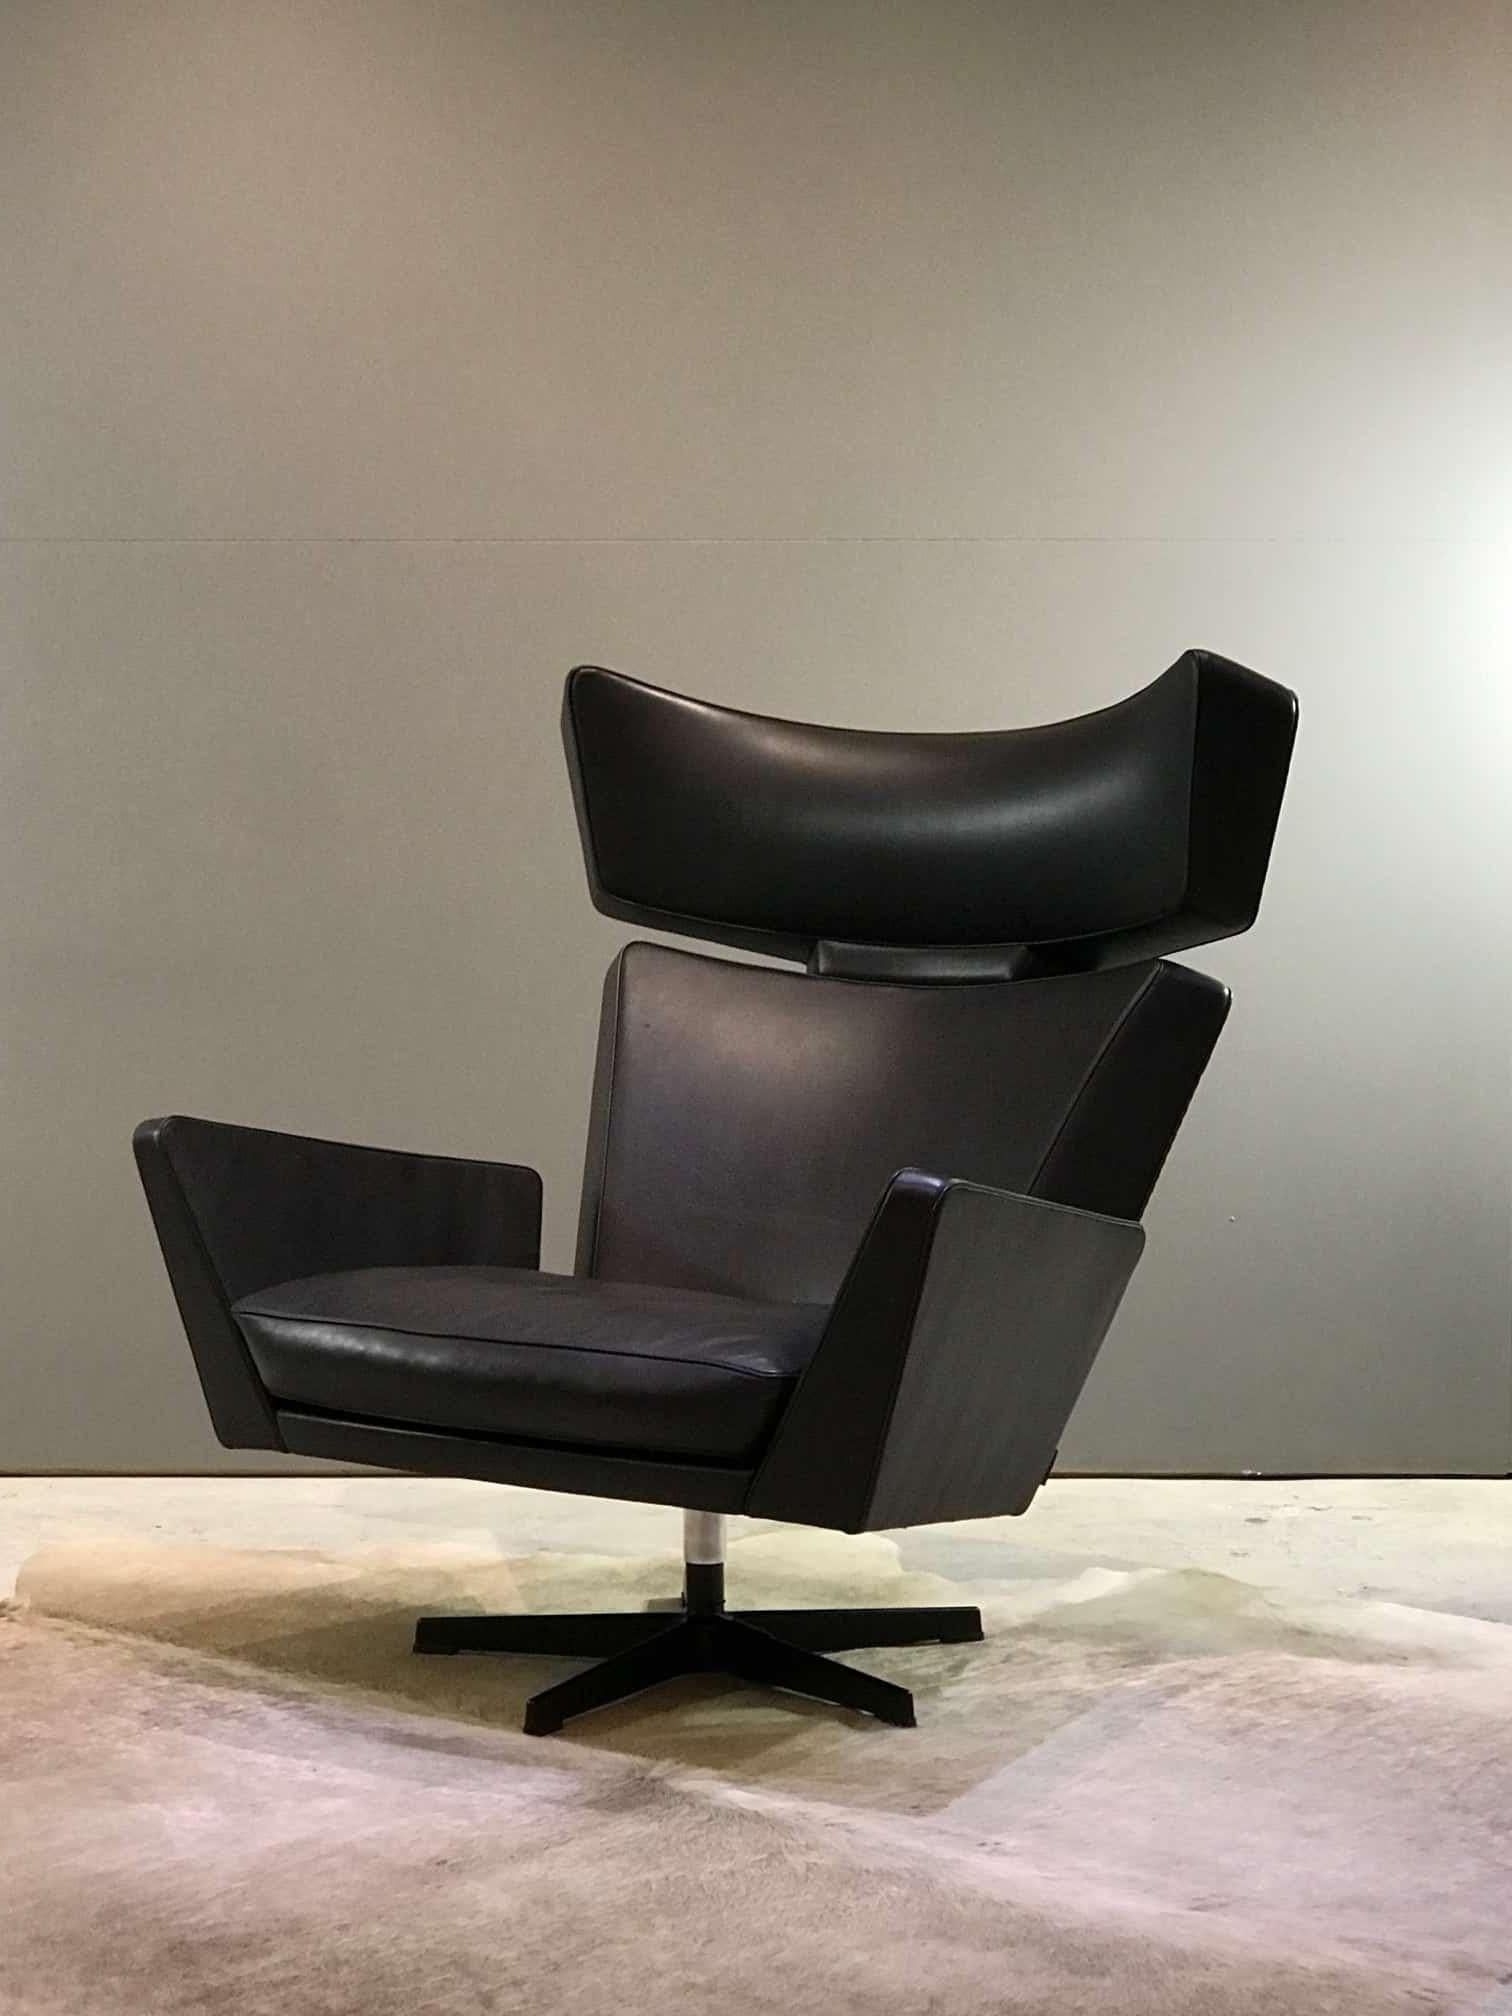 Midcentury Black Leather Lounge Chair by Arne Jacobsen Oksen, Ox Chair For Sale 2